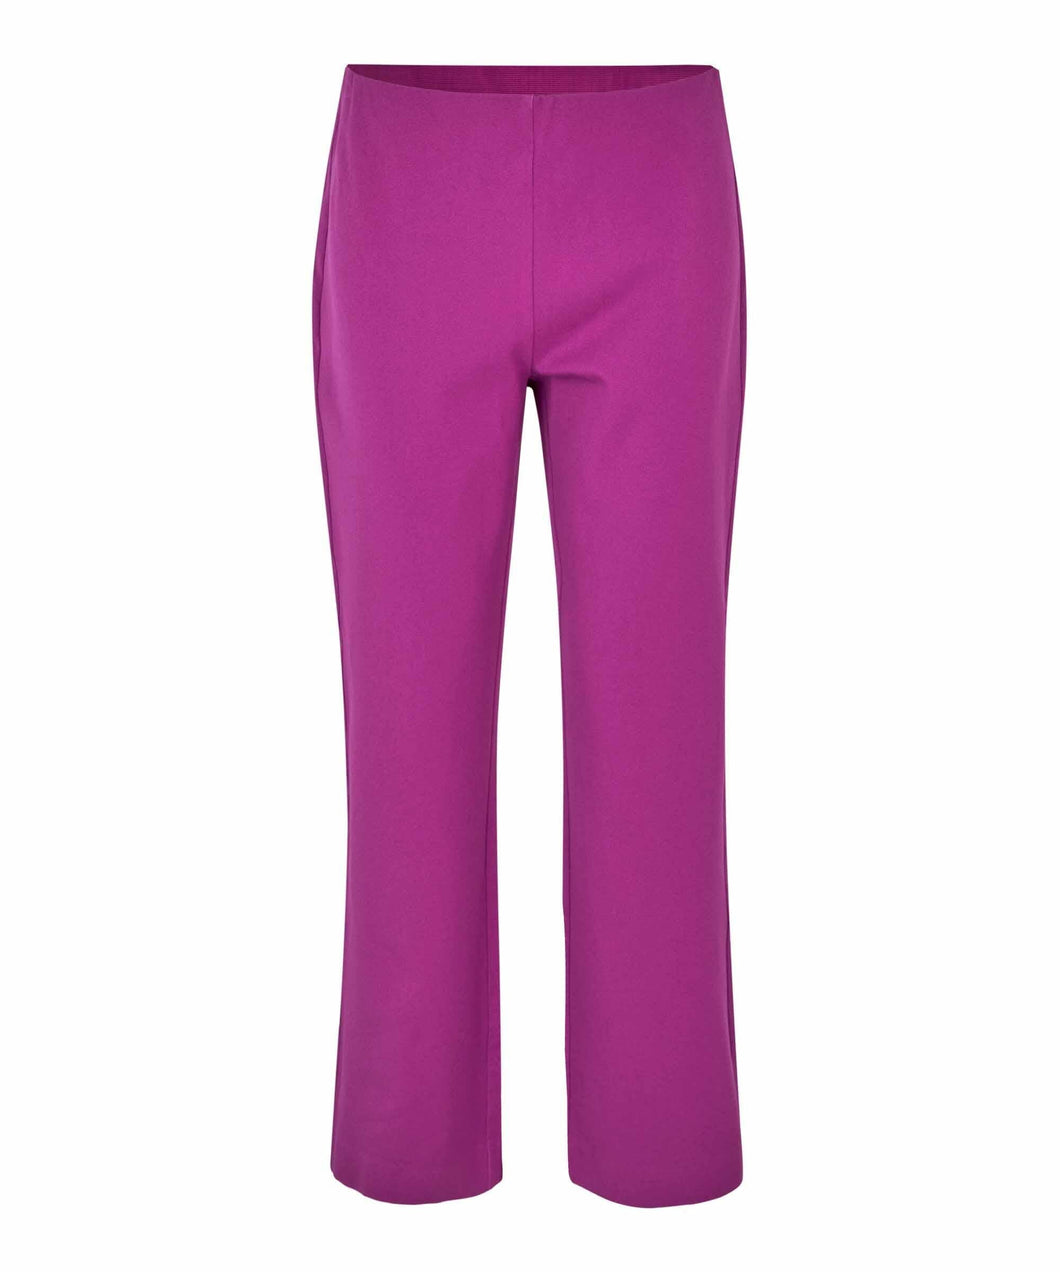 Papsan Bootcut Trousers in Wild Aster Trousers Masai 